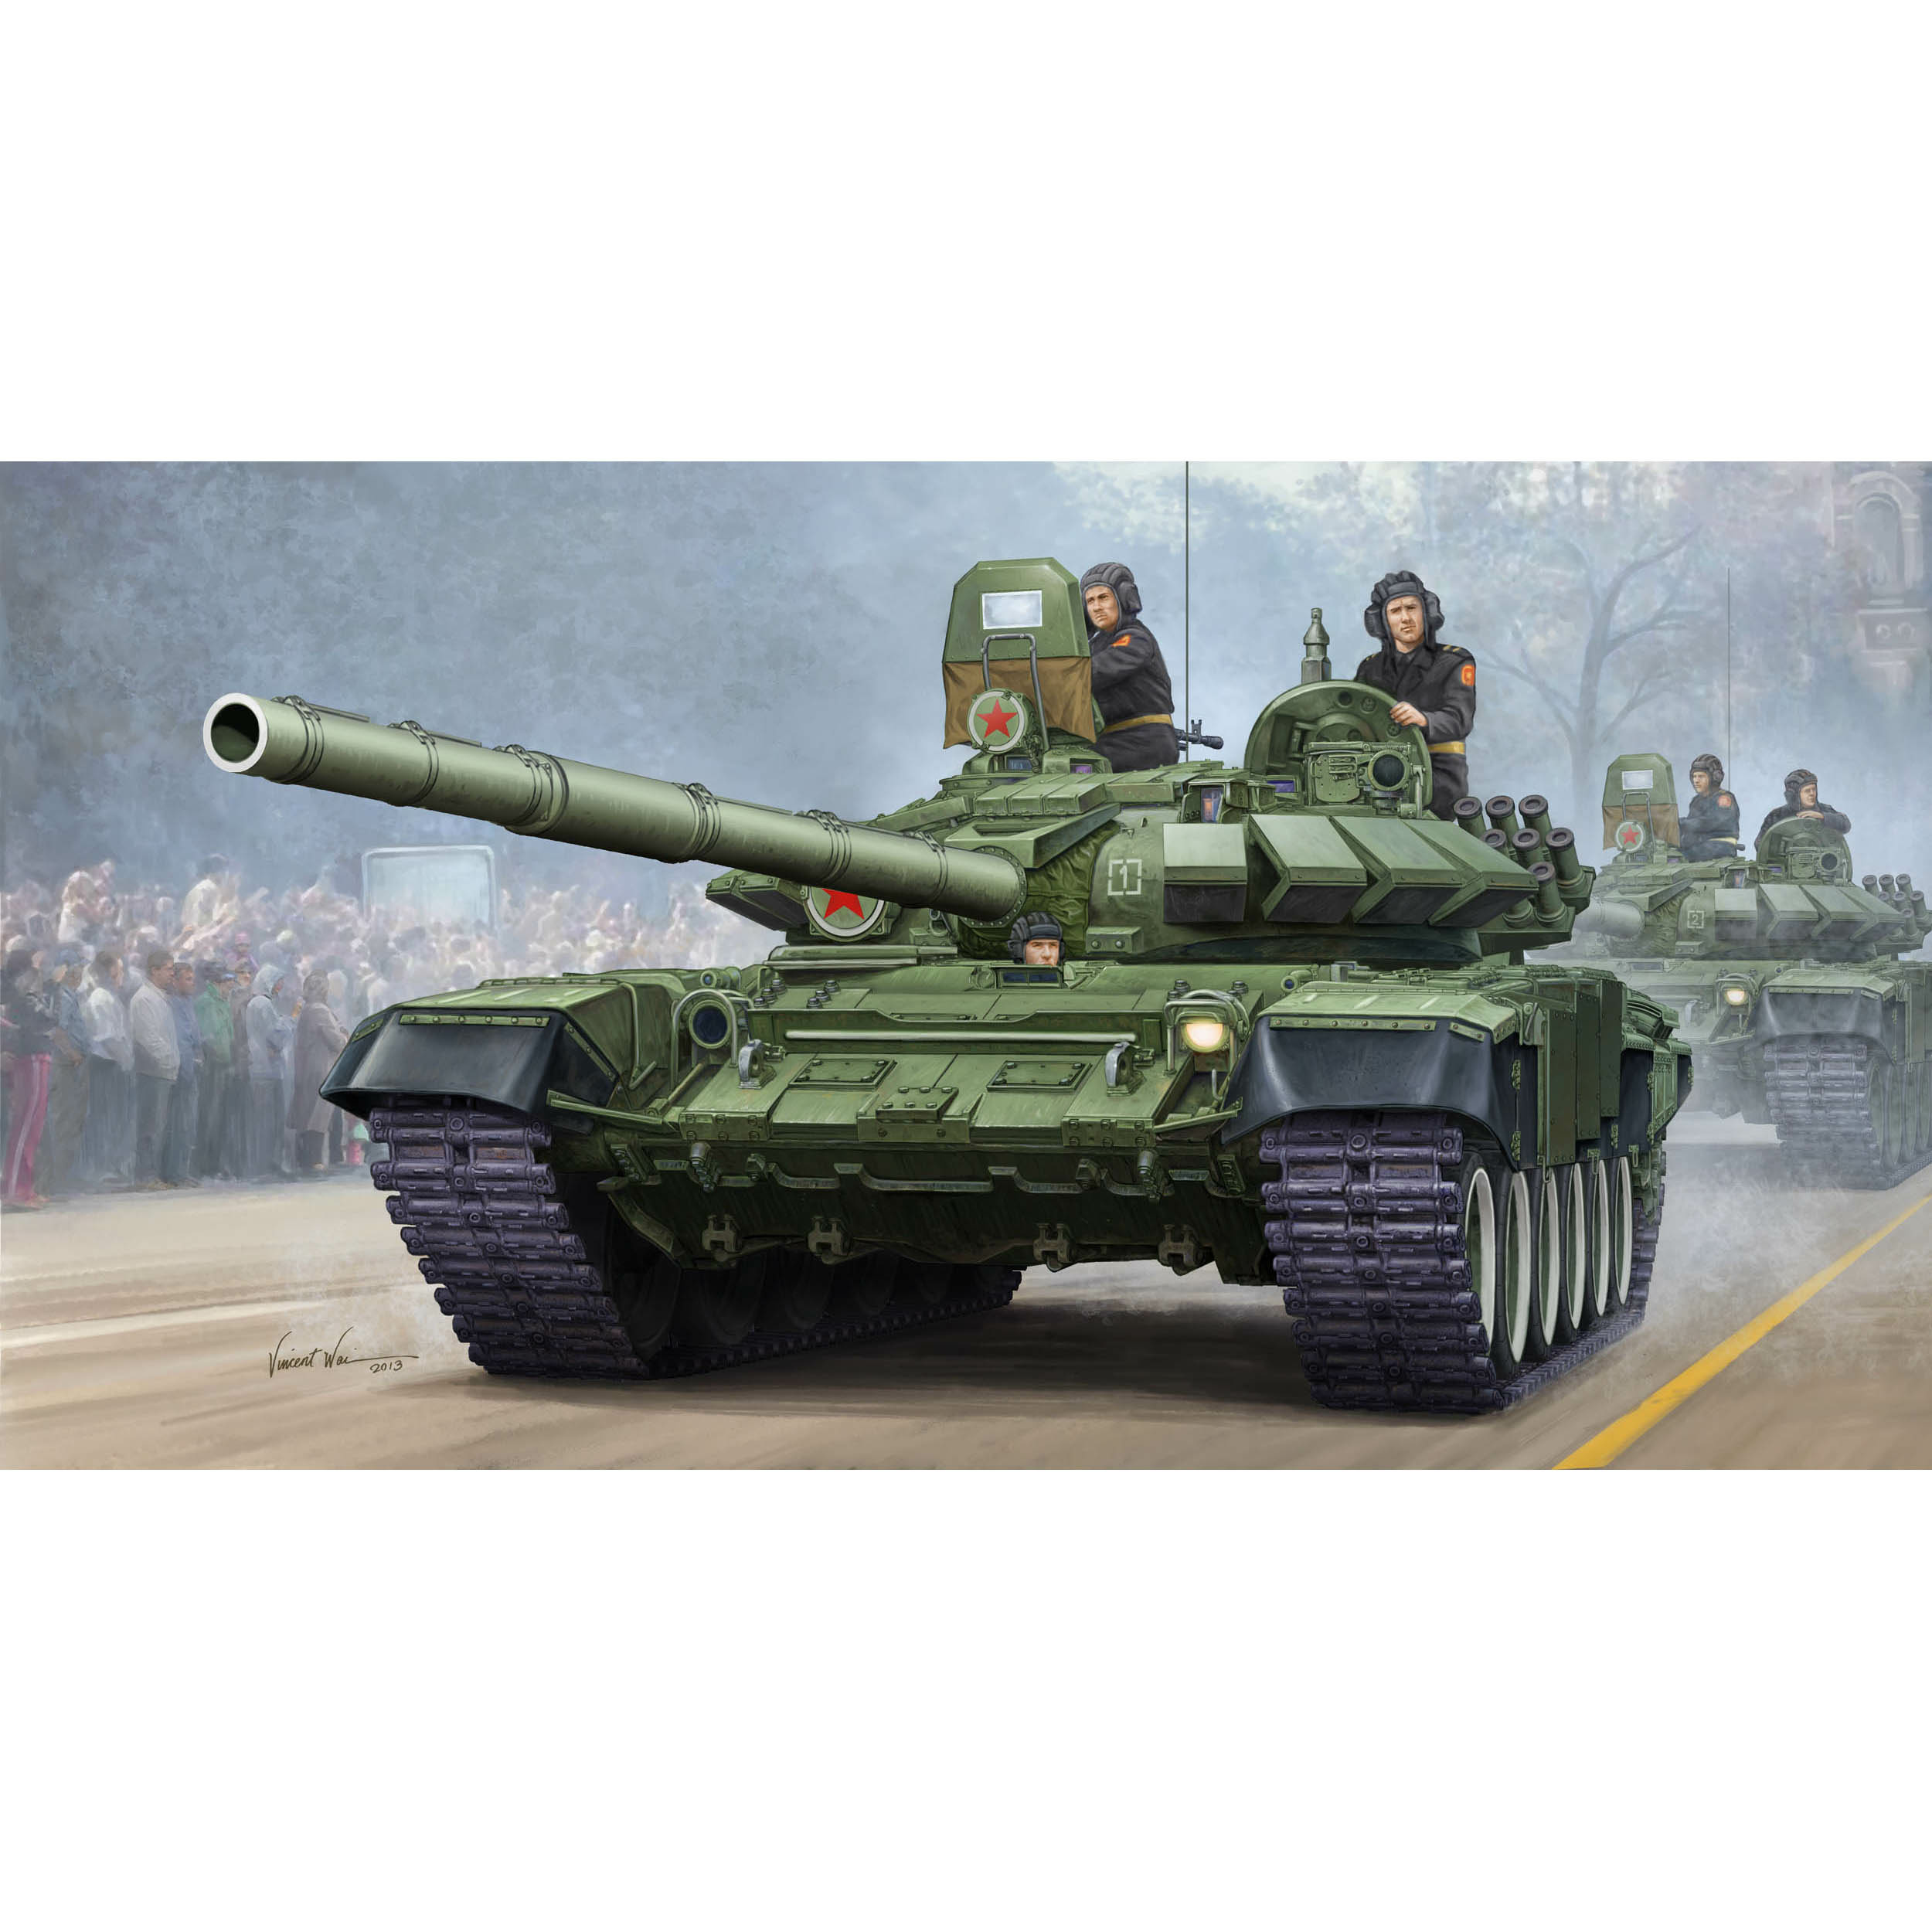 05564 Trumpeter 1/35 Tank 72B Mod 1989 MBT with cast tower